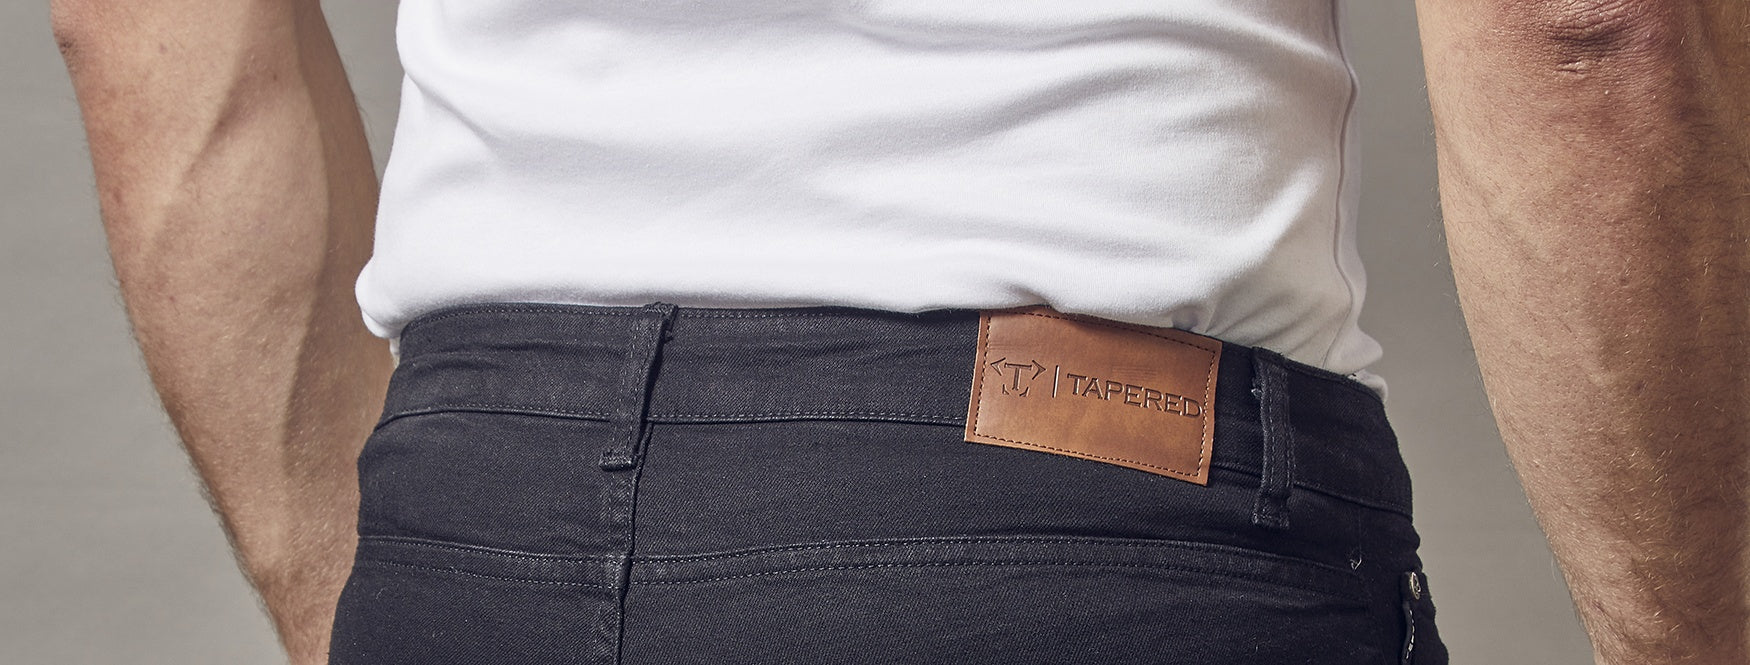 Low Rise Vs High Rise Jeans - What's The Difference?